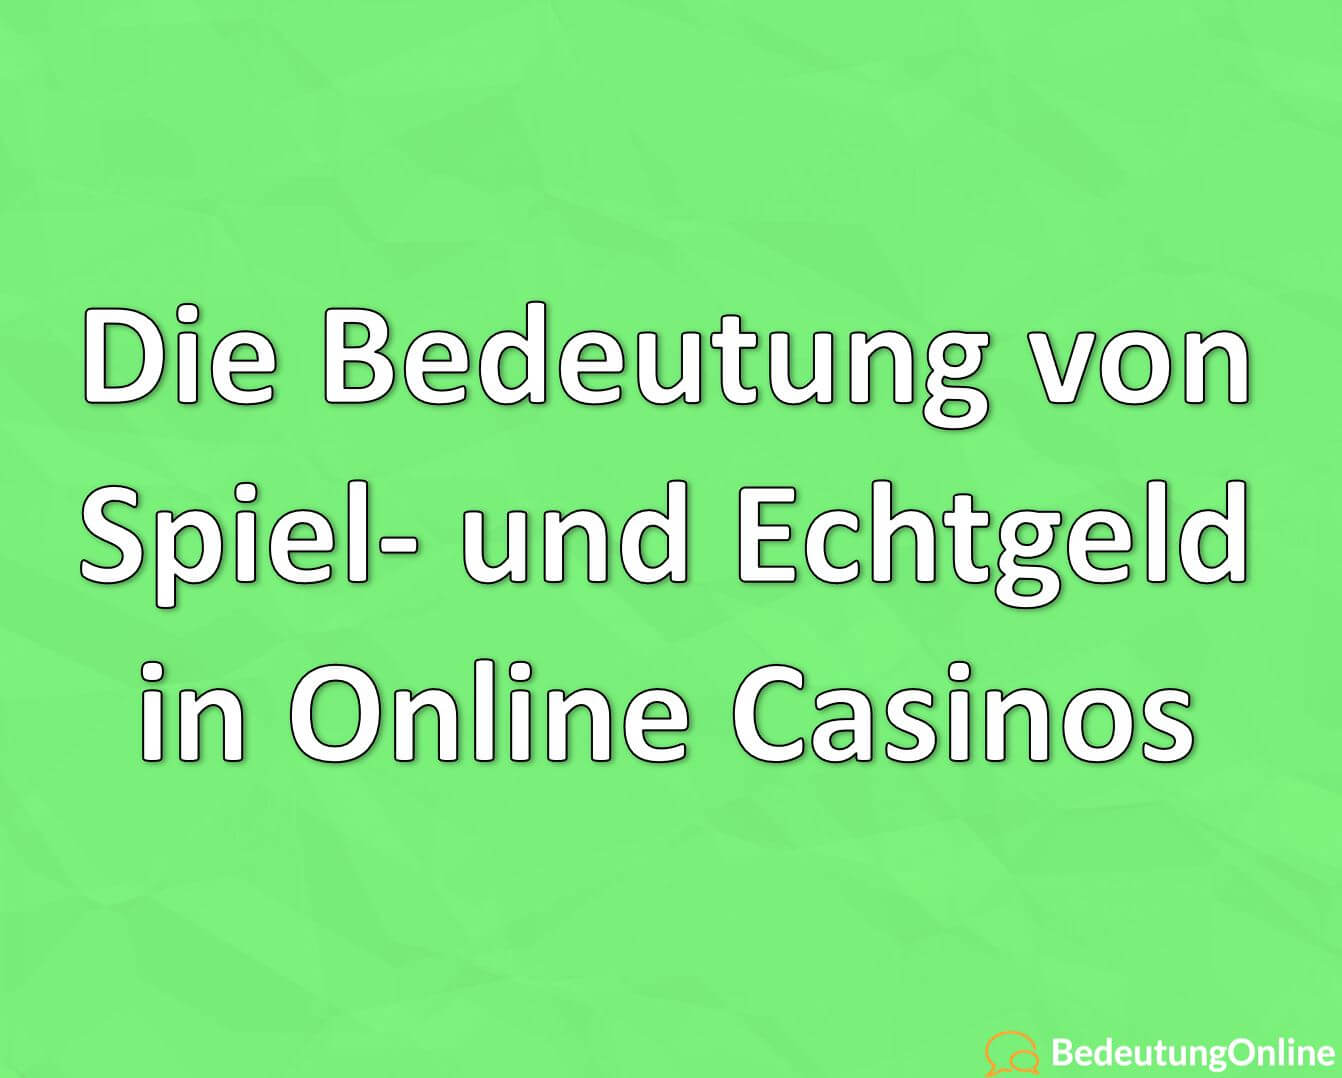 Online Casino Echtes Geld - Pay Attentions To These 25 Signals